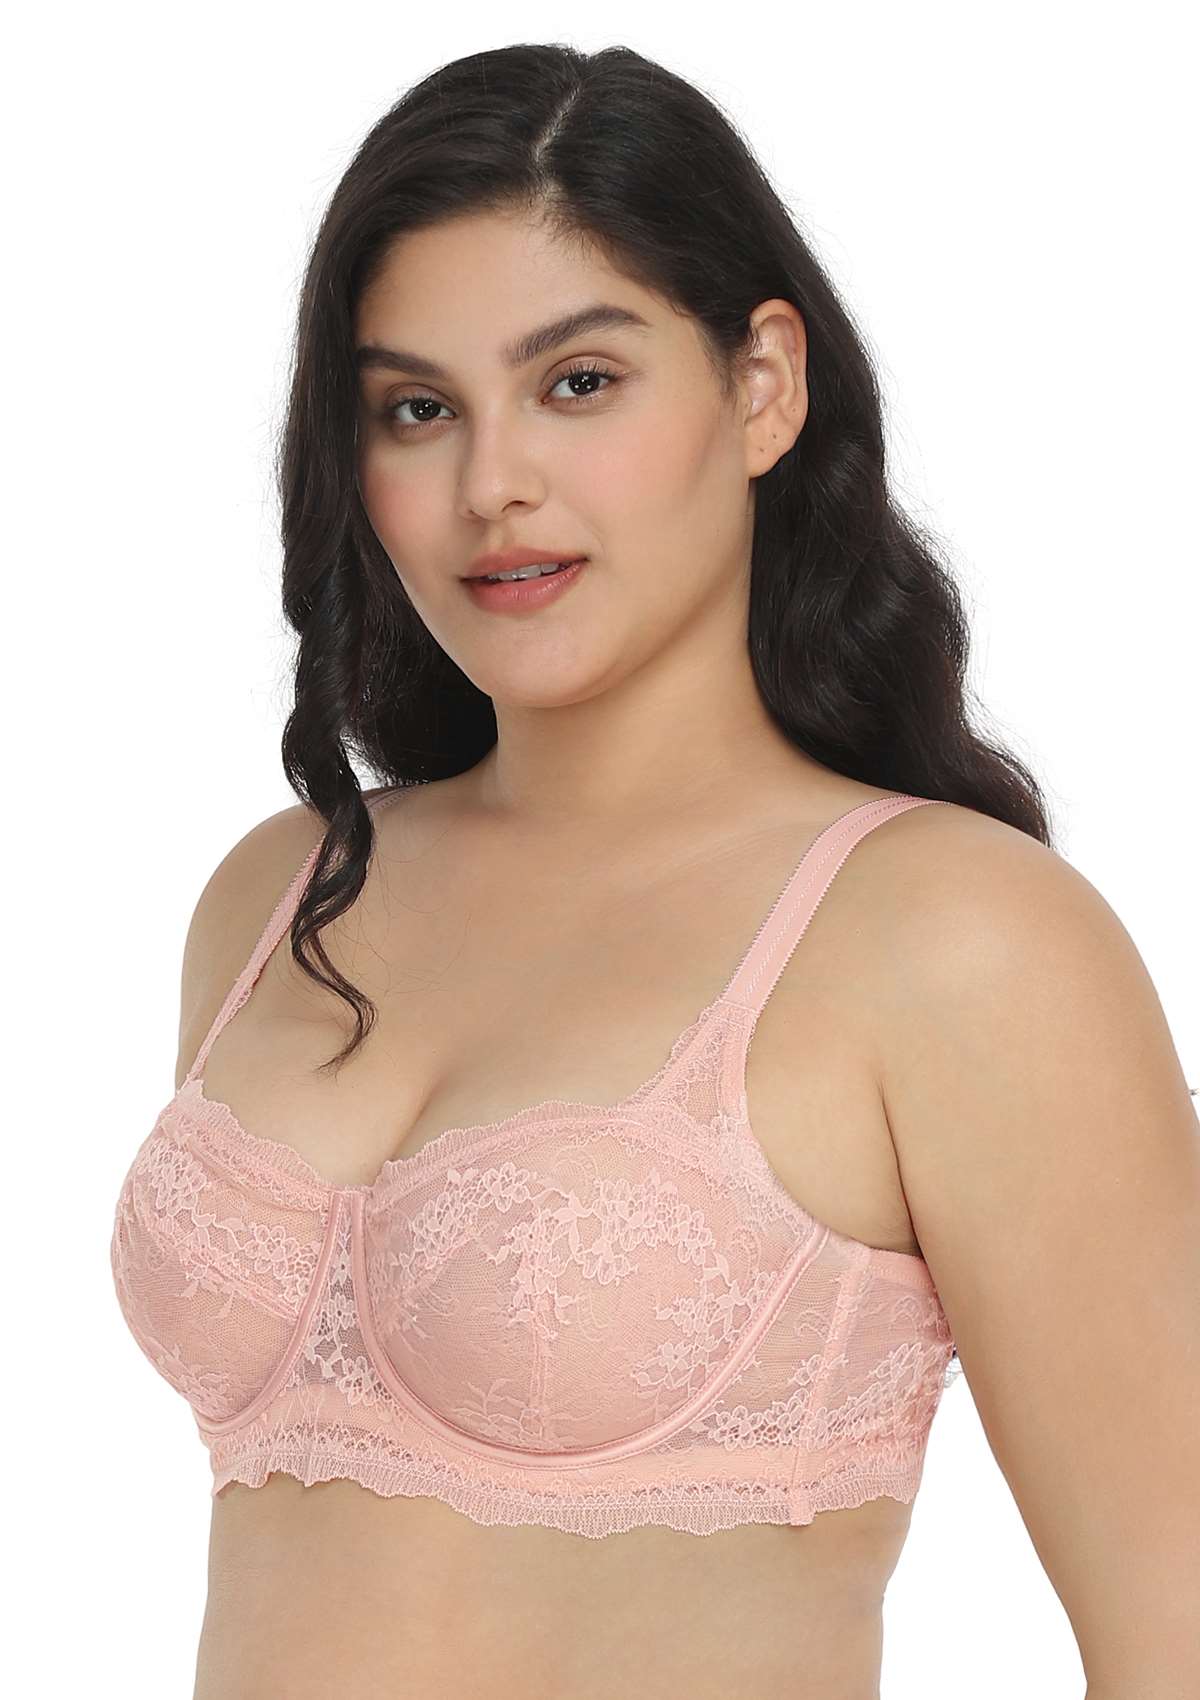 HSIA Floral Lace Unlined Bridal Balconette Delicate Bra Panty Set - Pink / 36 / DDD/F